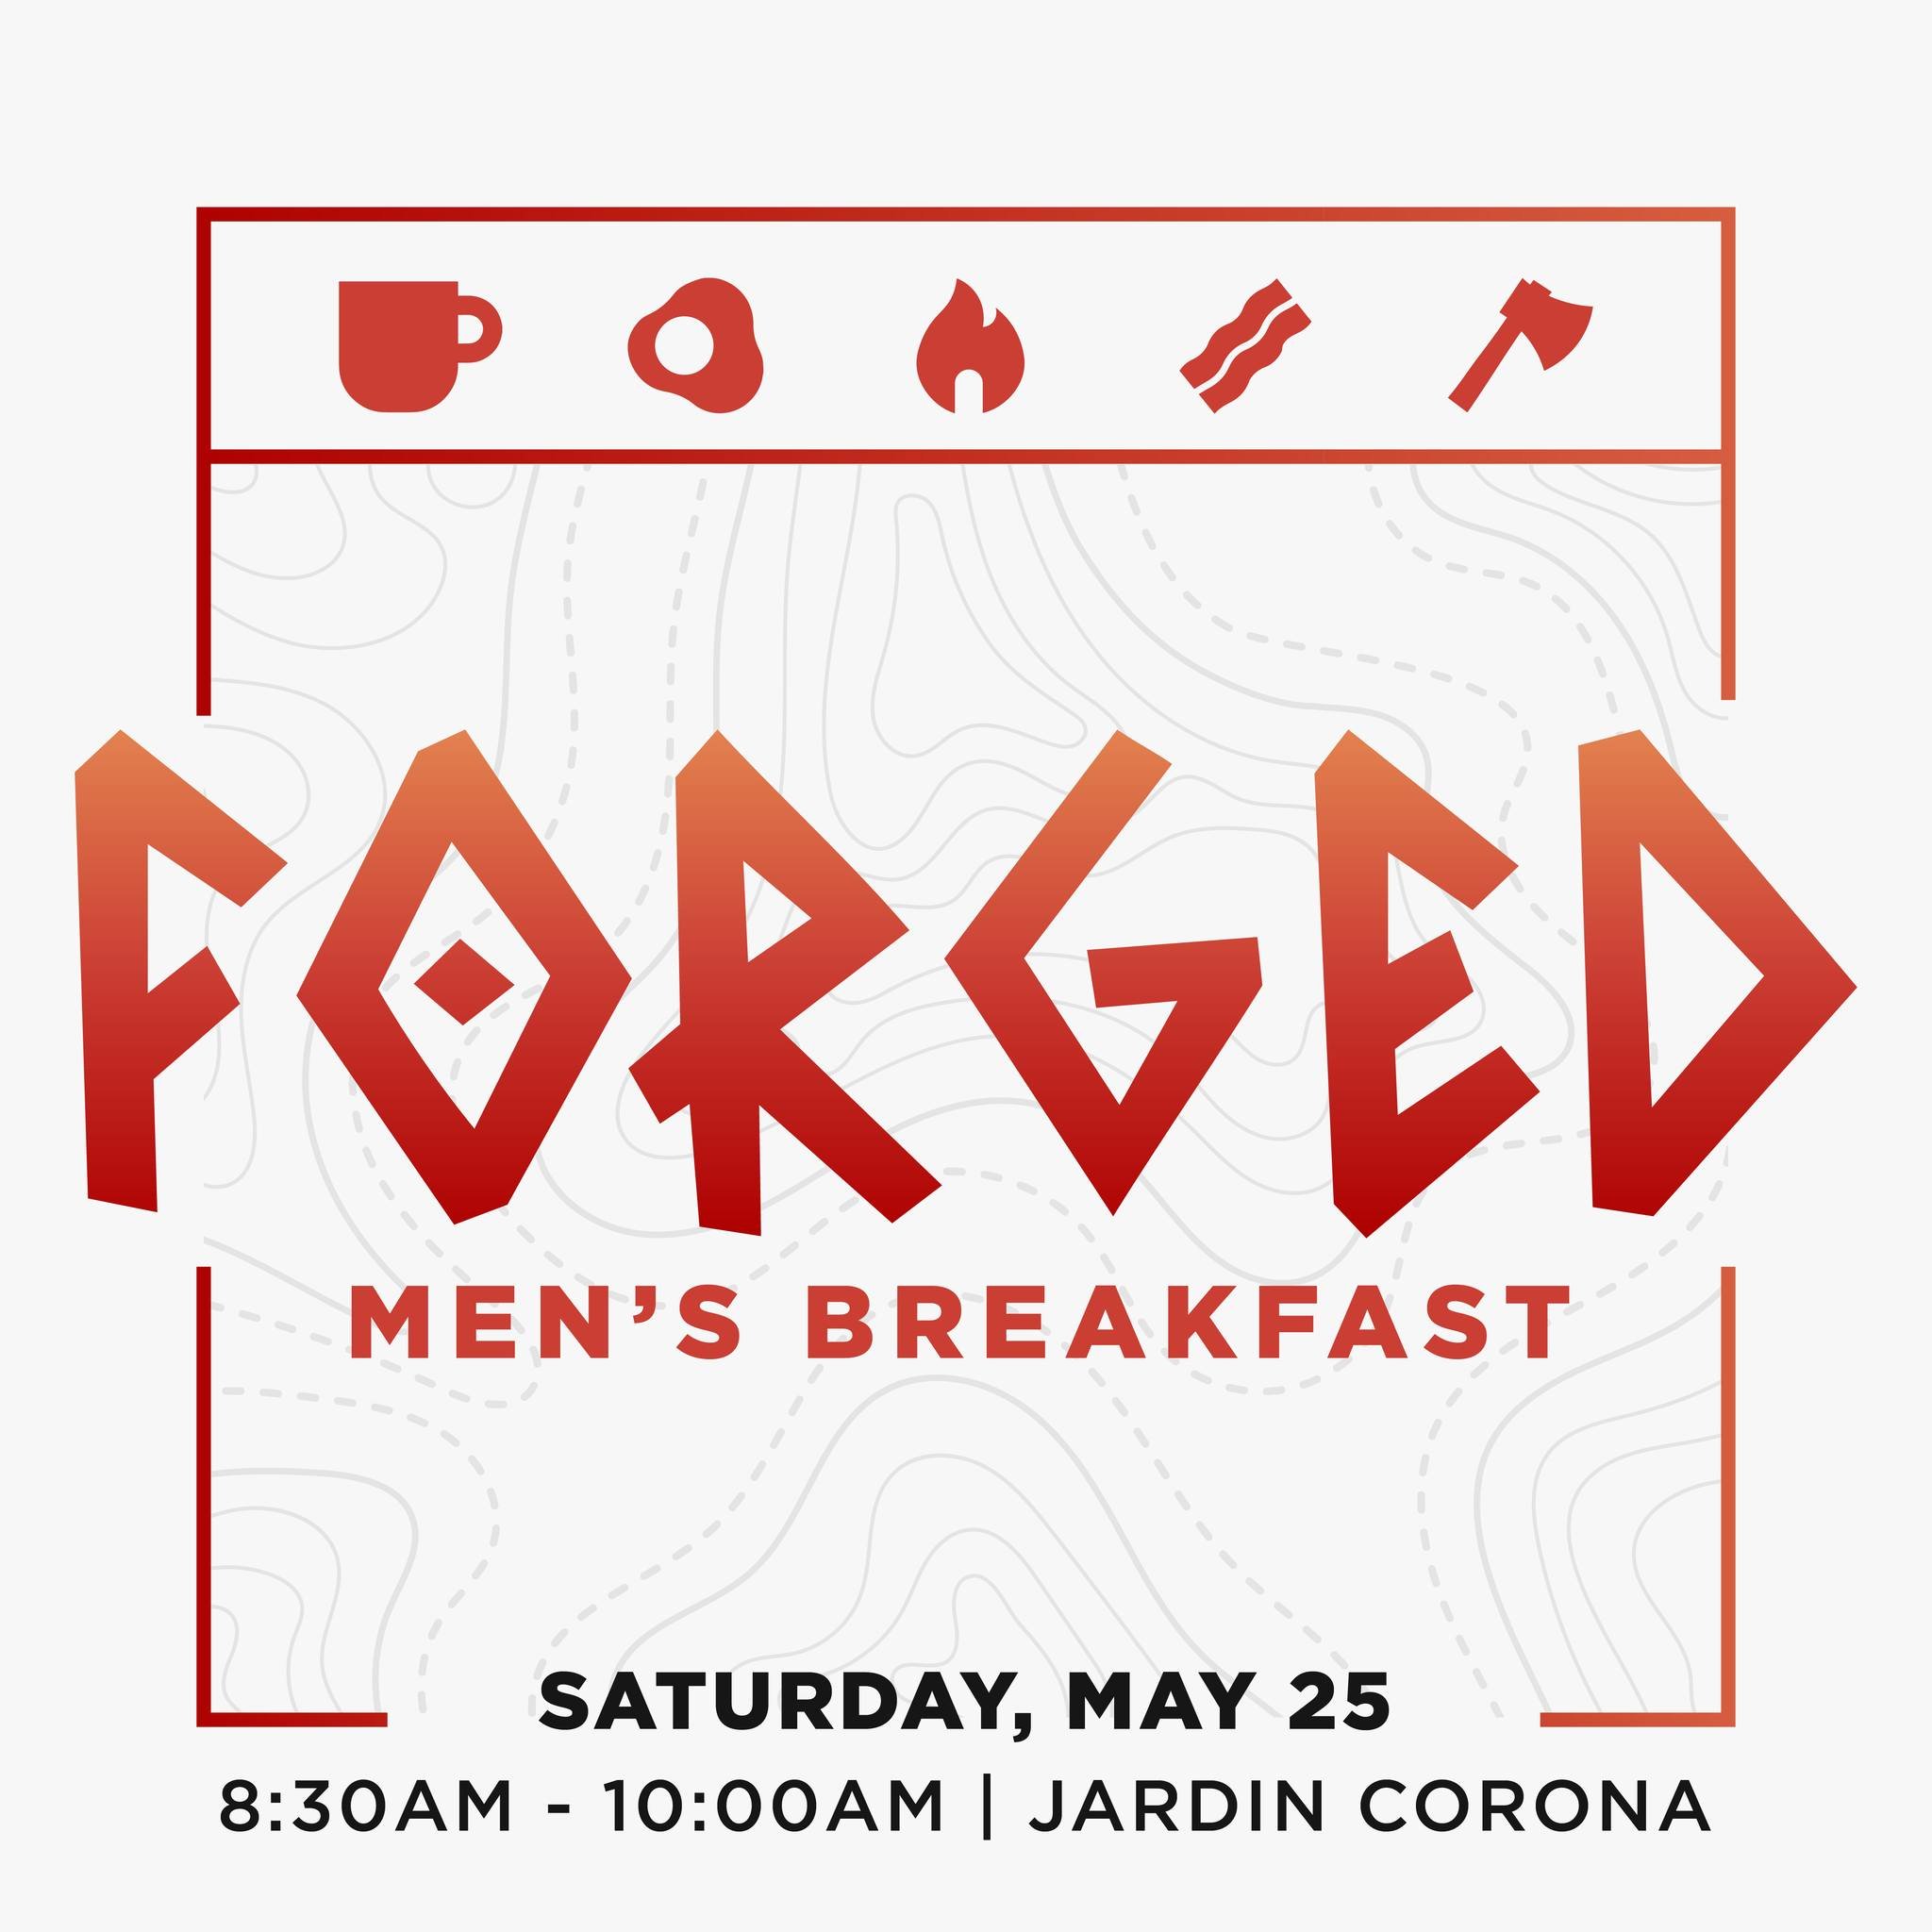 Our men get together once a month for an awesome time of encouragement, great food, and a challenging message to help us grow into the men God has called us to be. Cost is just $5. Don't miss this incredible event! Register today at vintage.church/ev